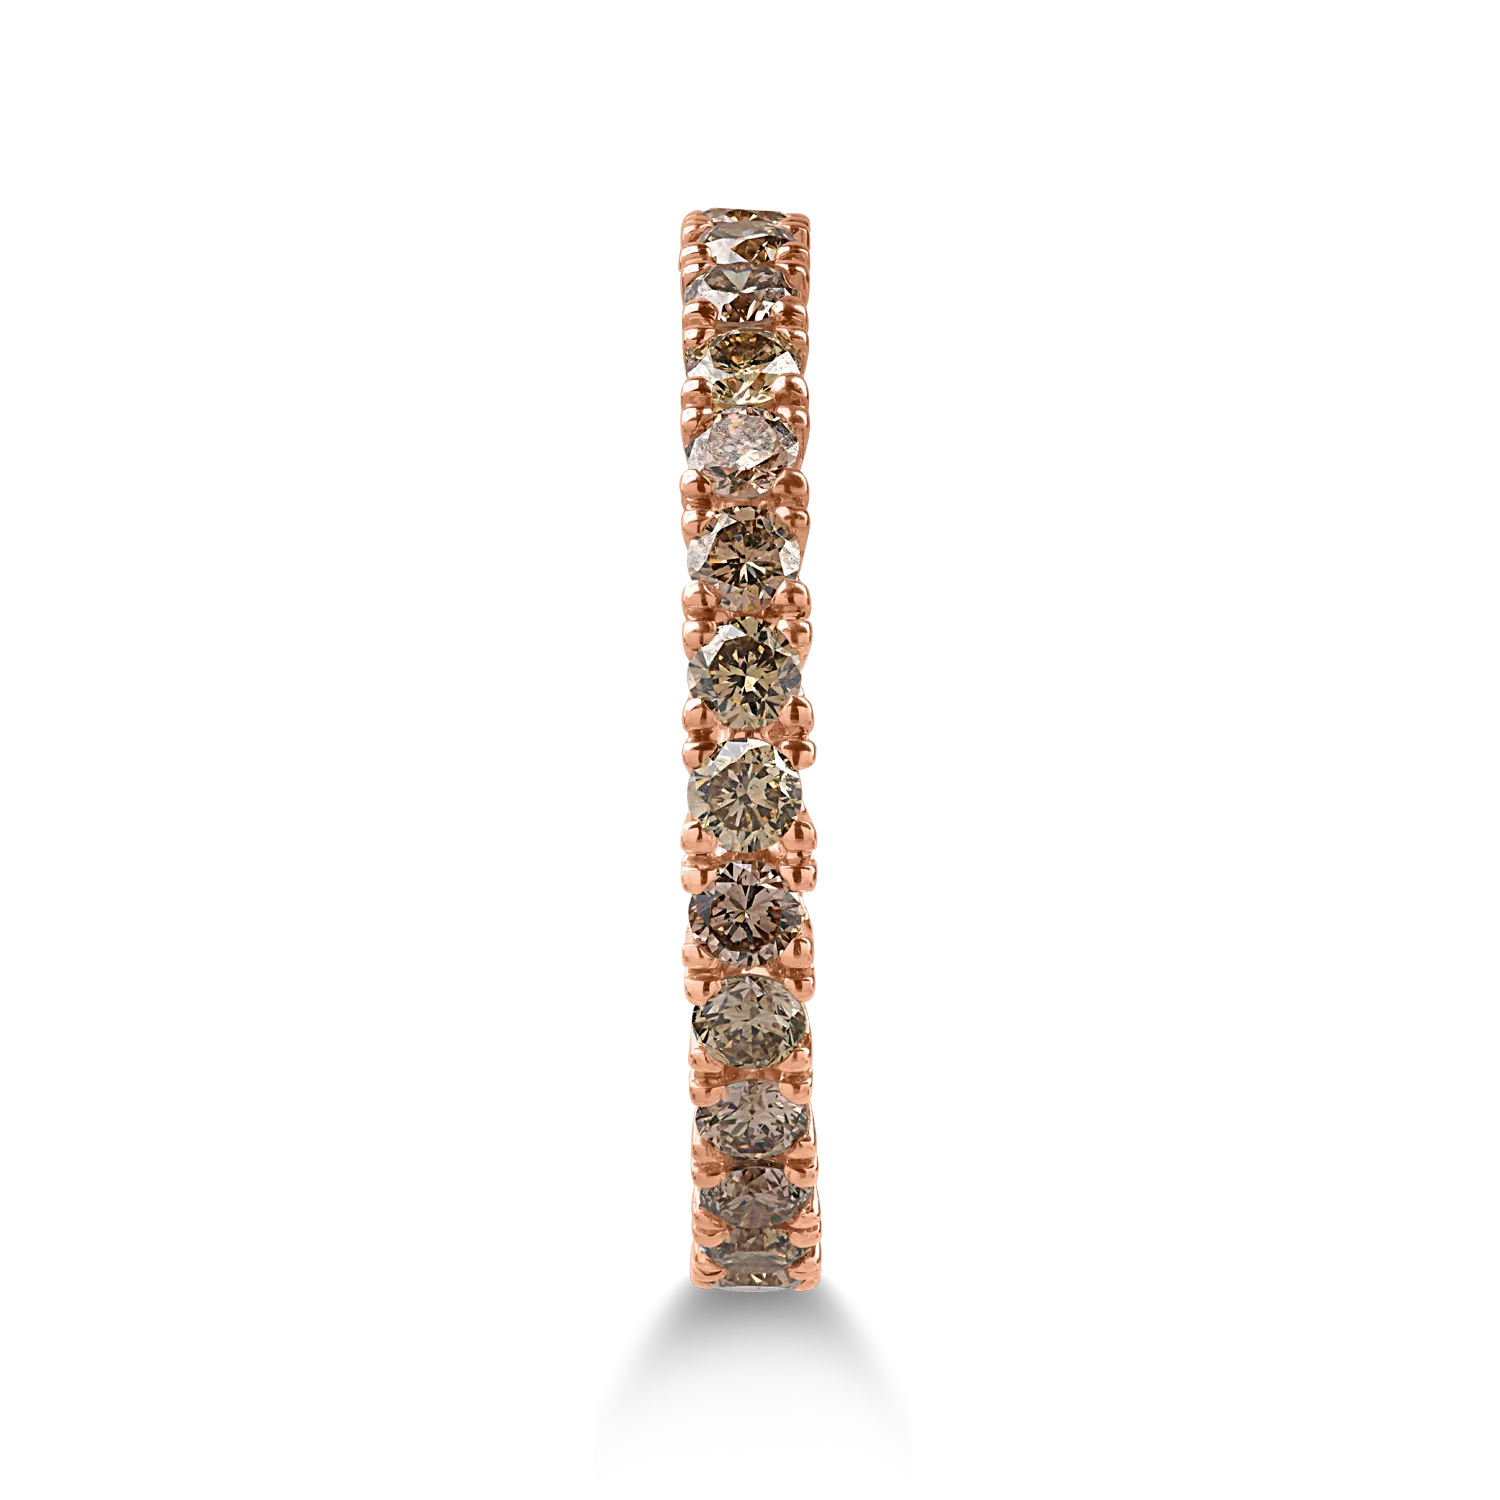 Eternity ring in rose gold with 1.08ct brown diamonds